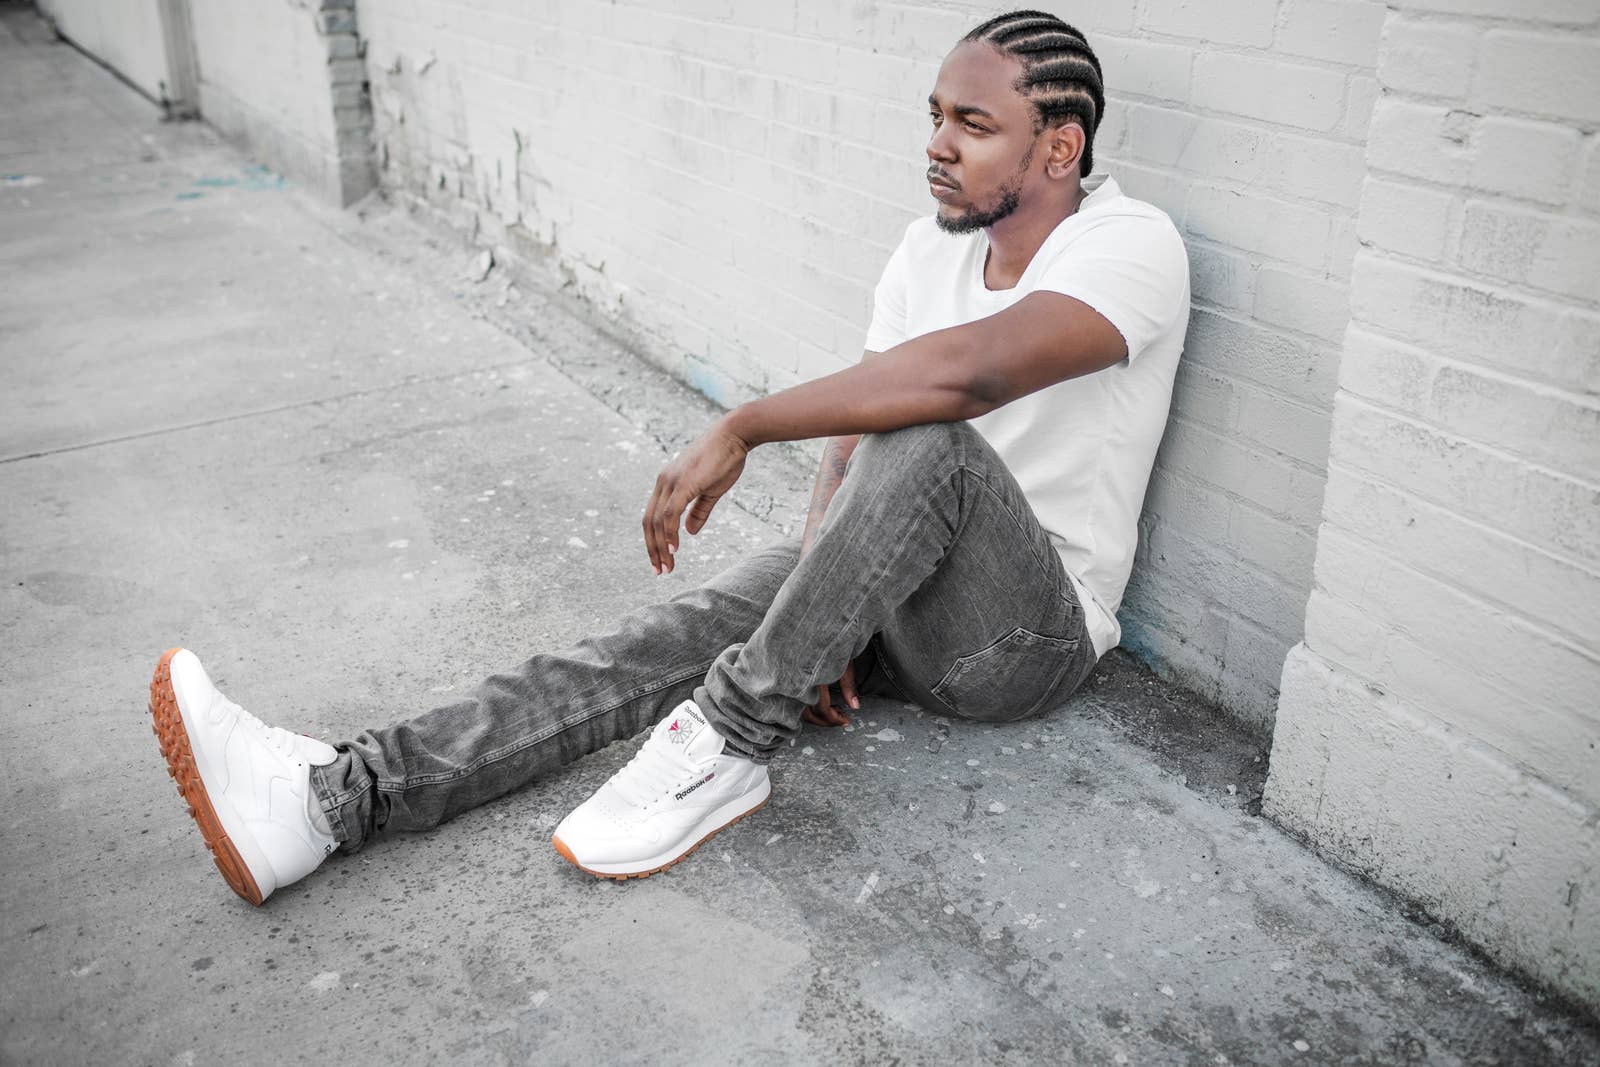 Kendrick Lamar Teams Up With Reebok To Design Sneakers And Keep Kids Off  The Streets